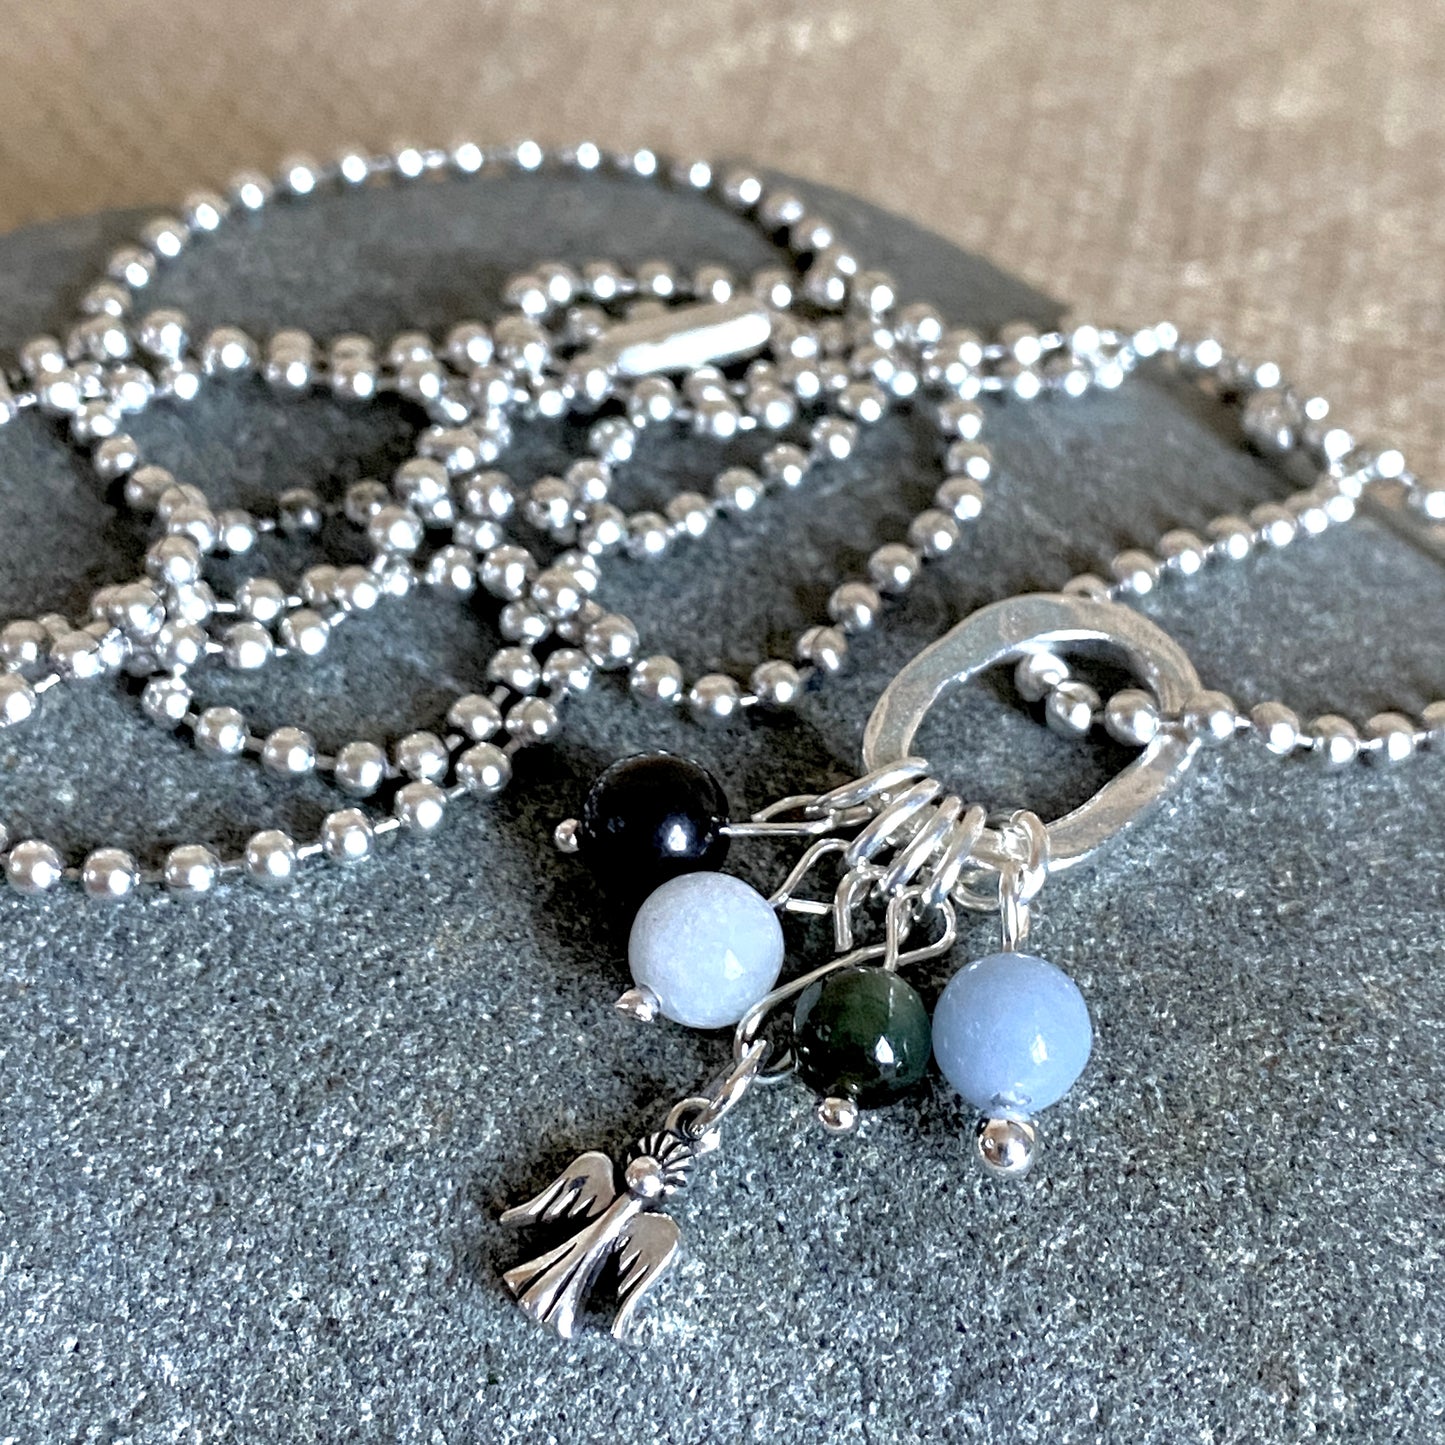 Gemstone Angel Connections Ball Chain Necklace with Silver Angel Charm